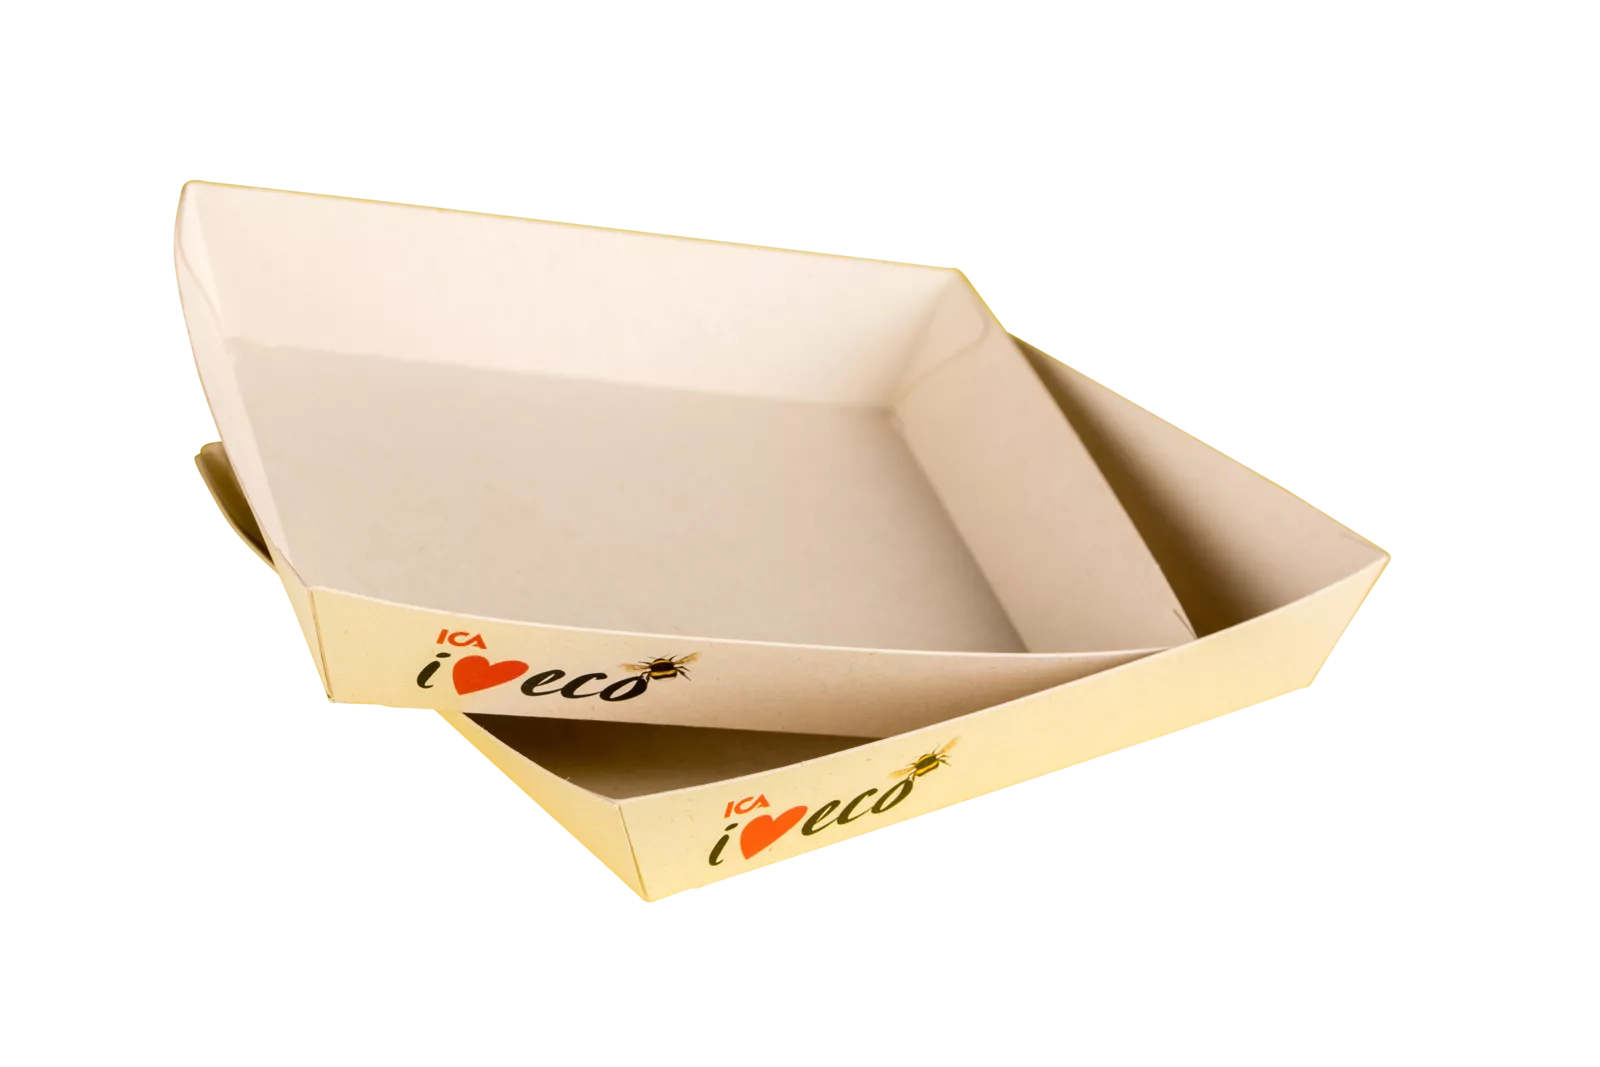 PaperWise eco paper board sustainable packaging food bio organic natural fruit vegetable ICA c